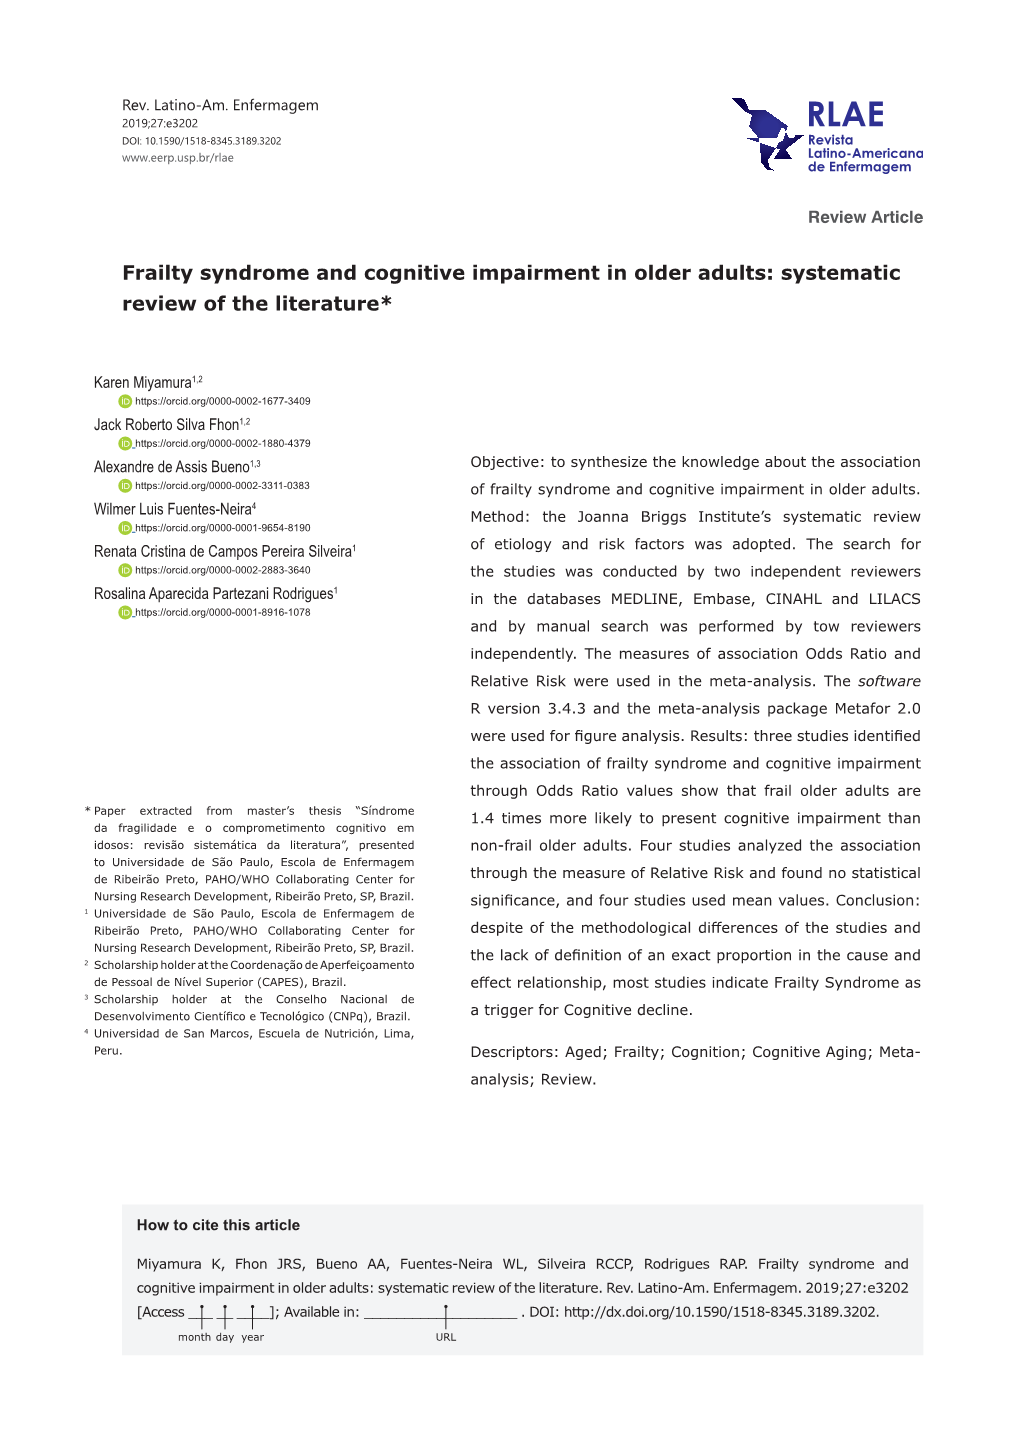 Frailty Syndrome and Cognitive Impairment in Older Adults: Systematic Review of the Literature*